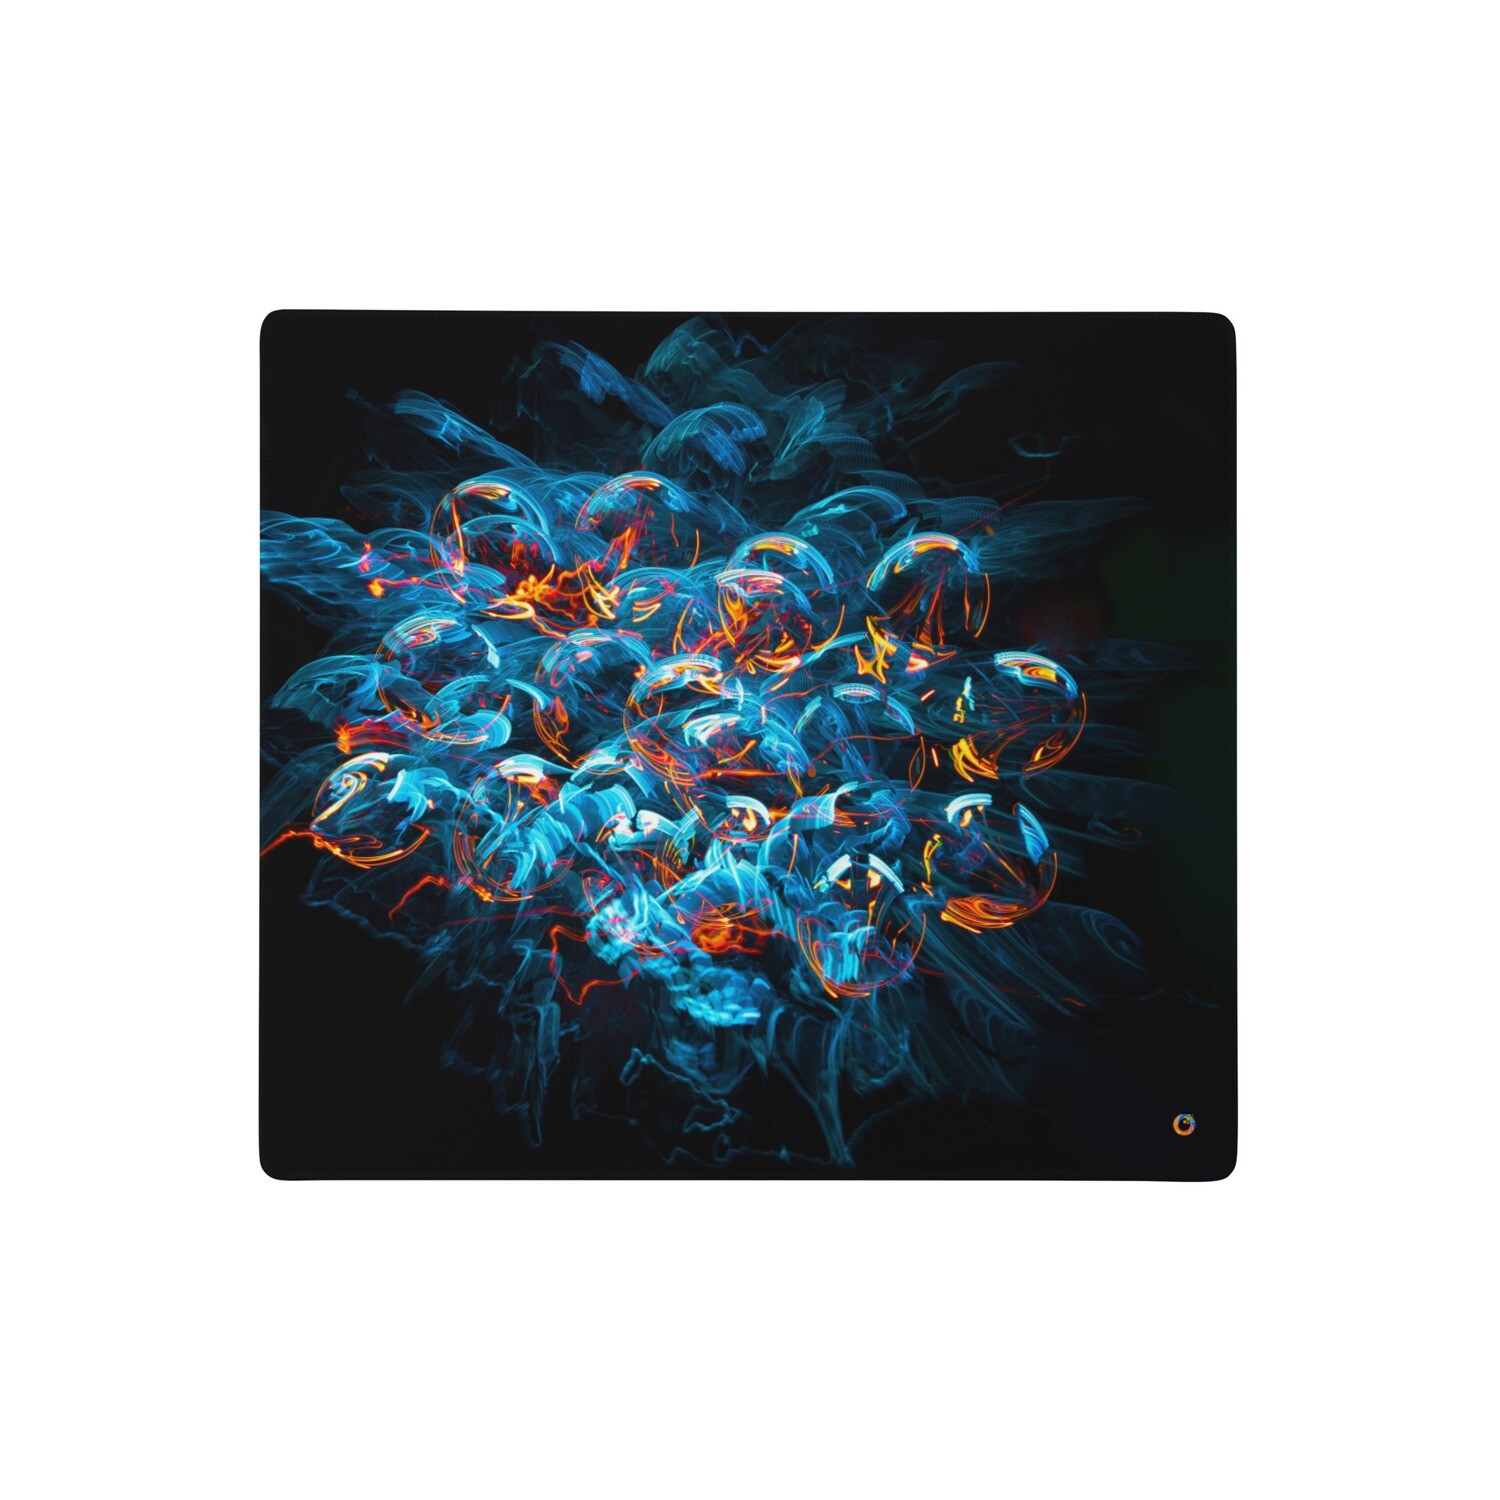 Gaming mouse pad #75